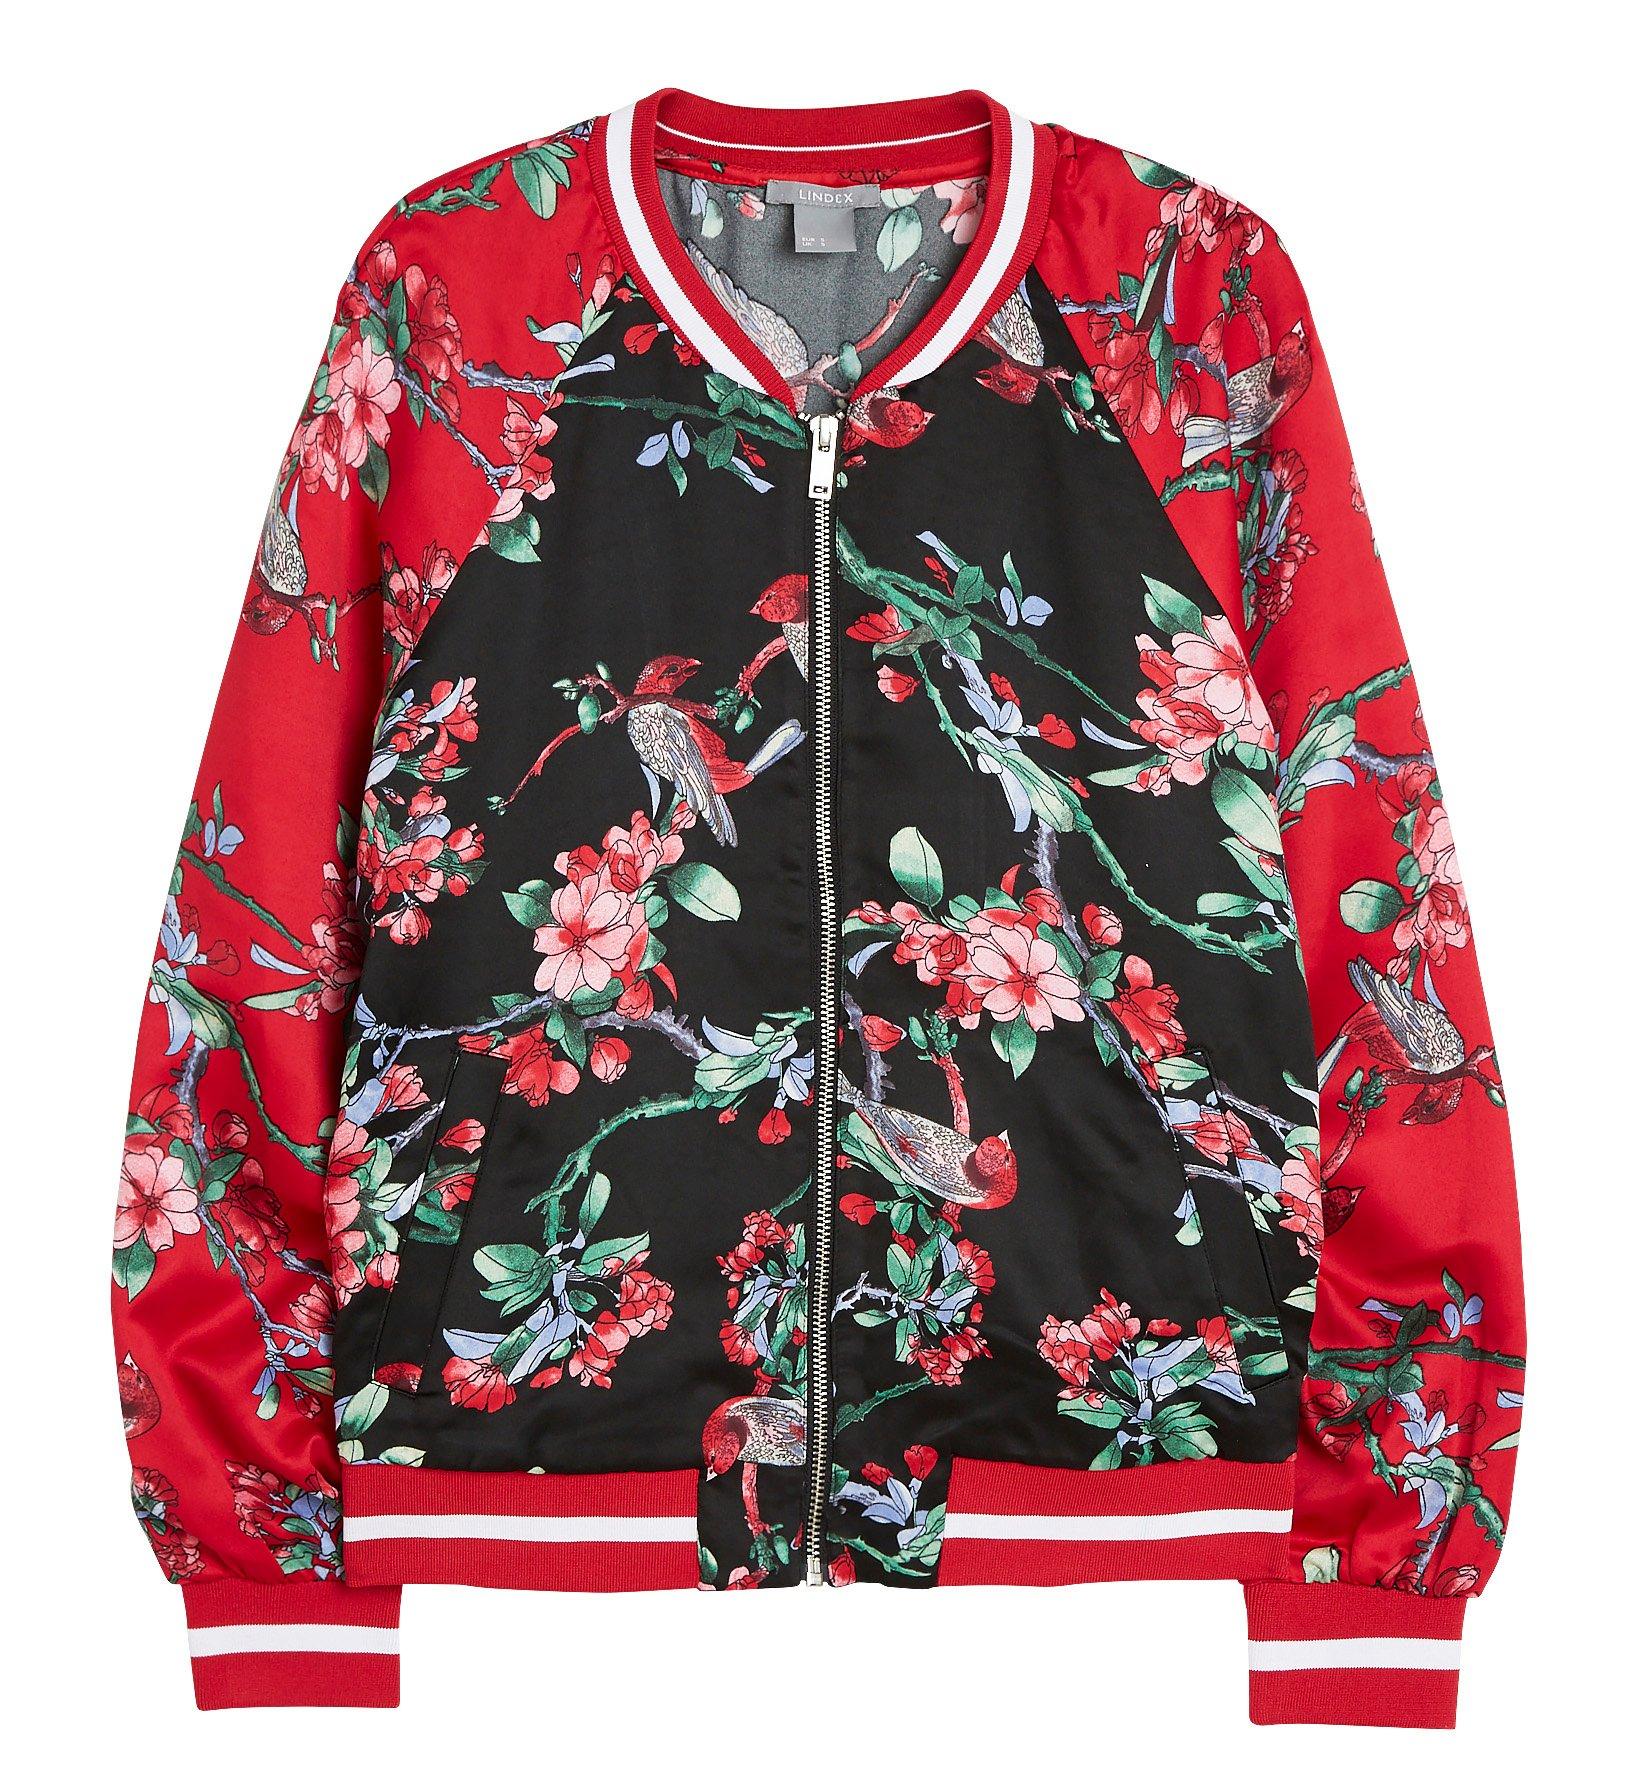 Adding to our Pretty Roses collection - a new Bomber jacket, and